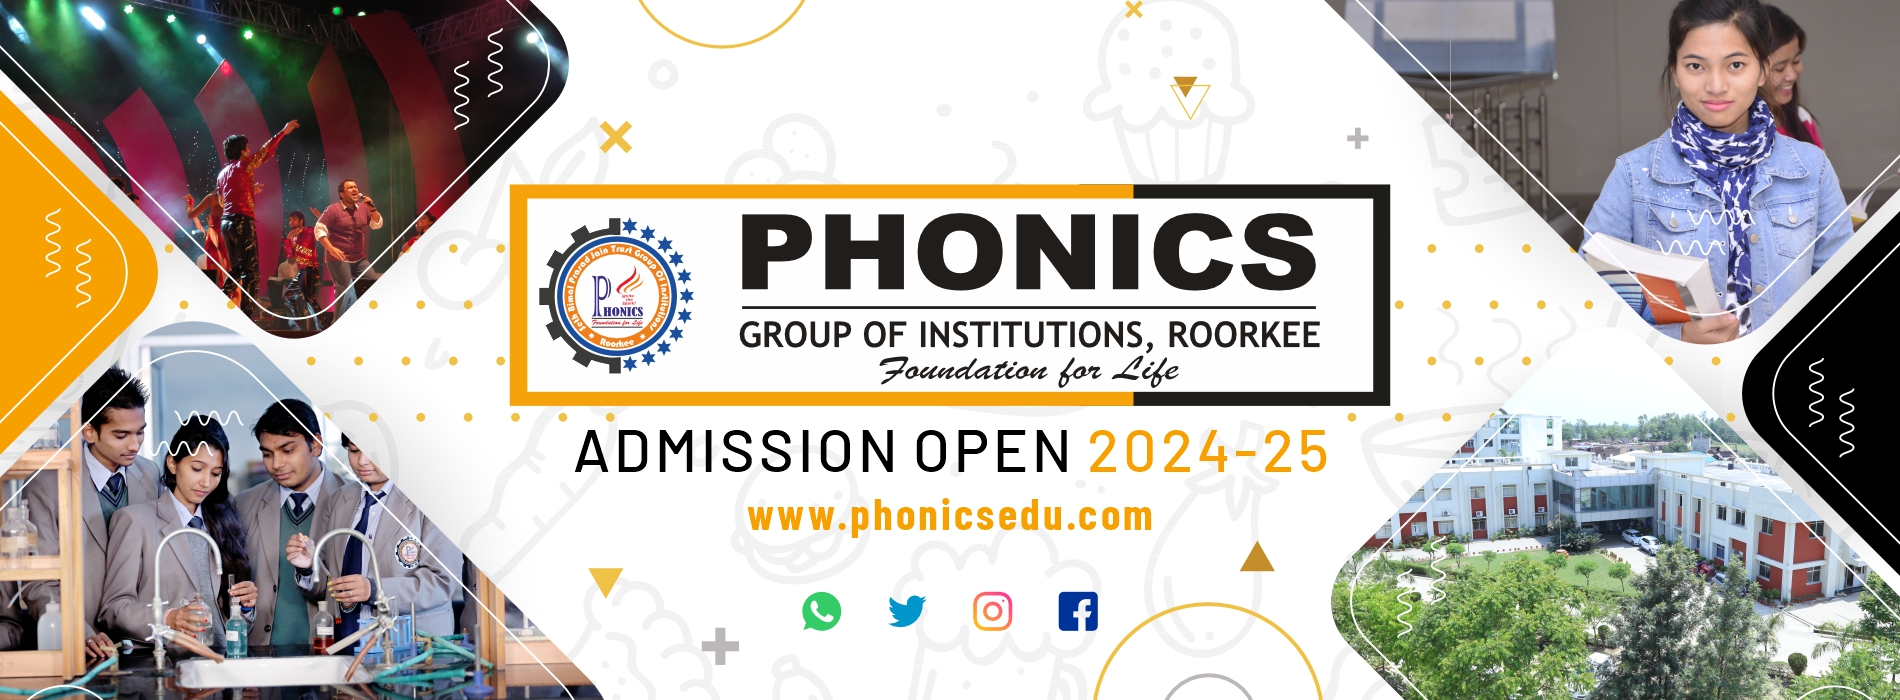 Phonics Group of Institutions Roorkee Logo